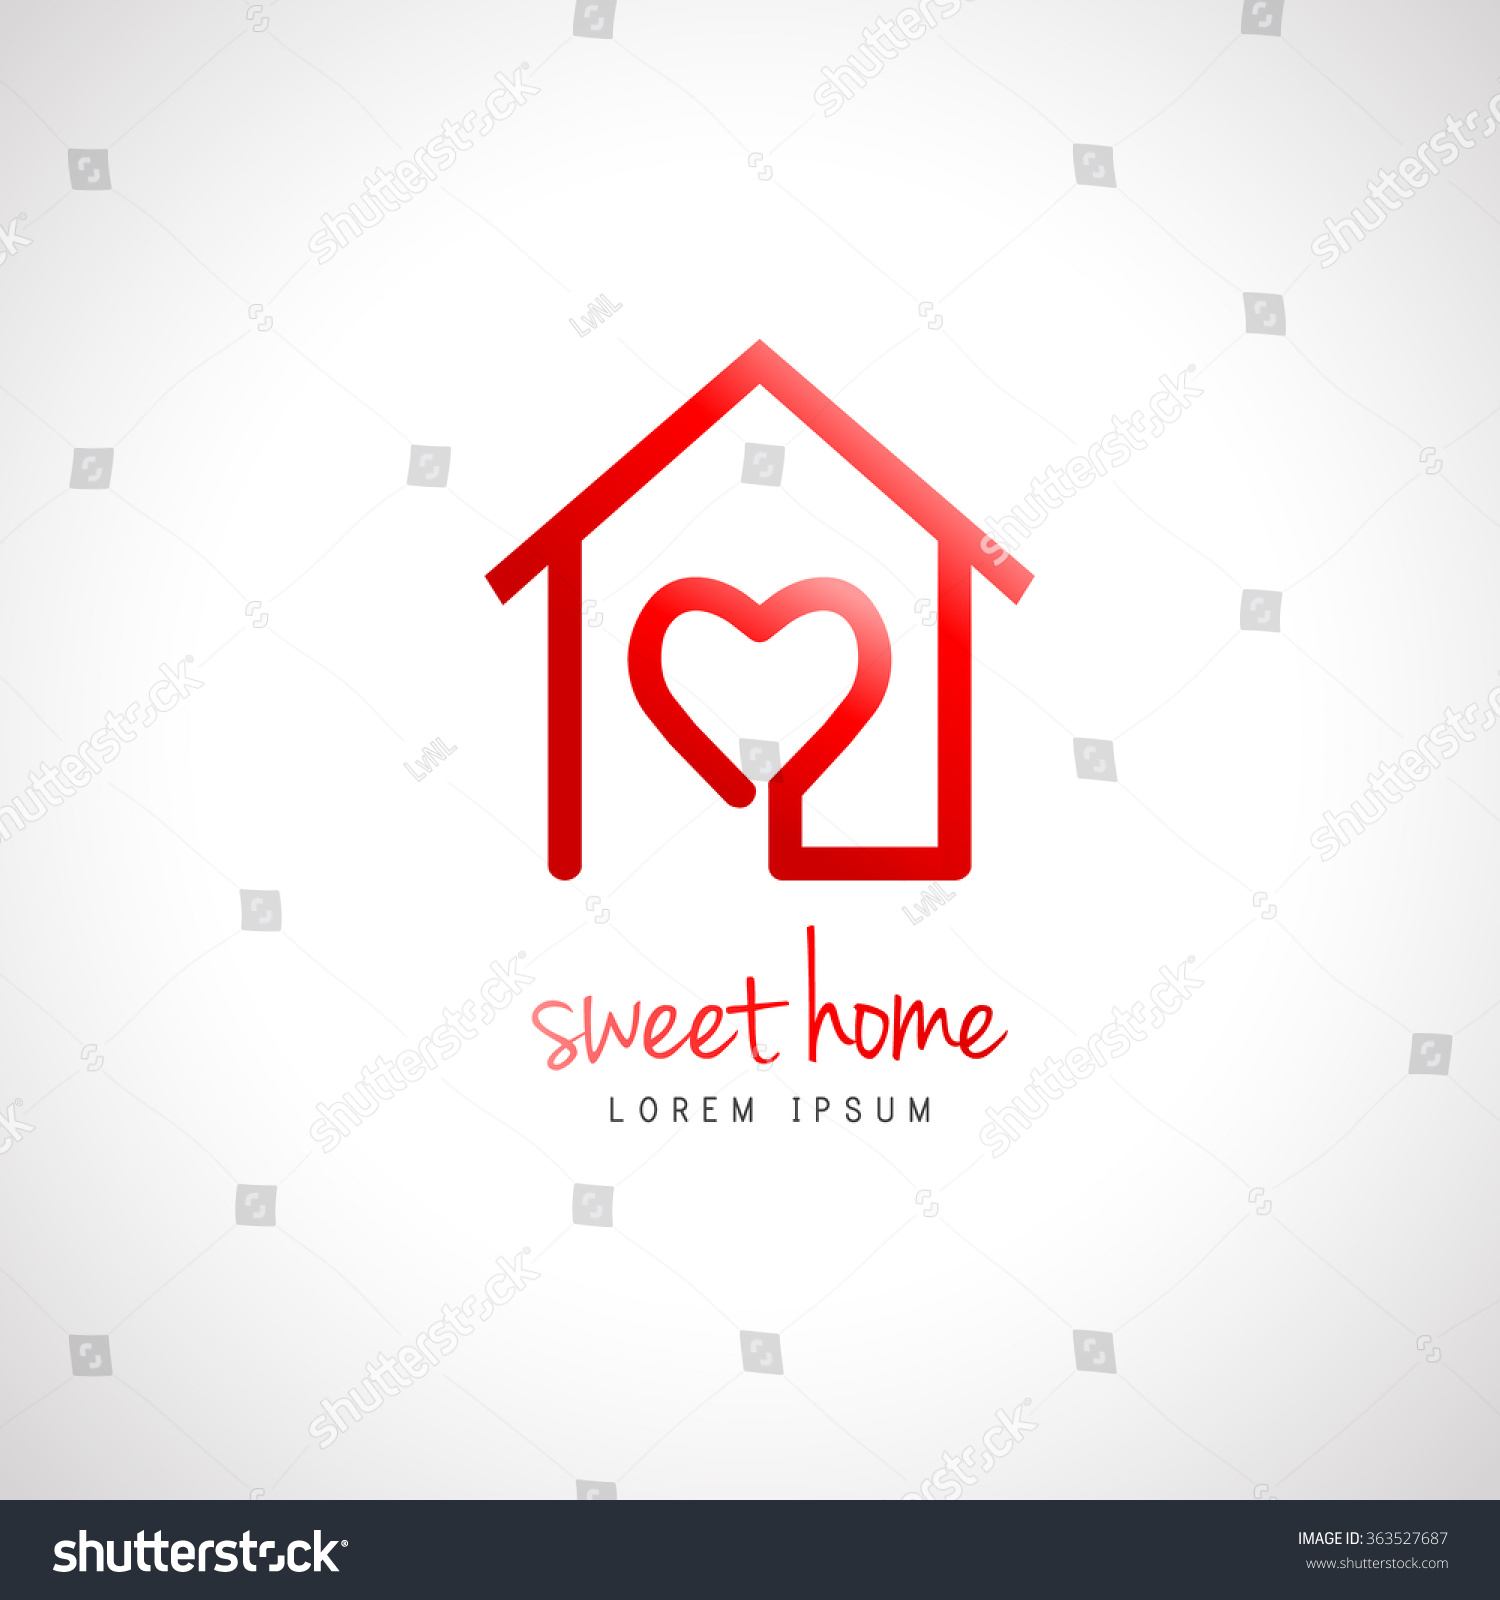 Abstract Home Logo Heart Inside House Stock Vector 363527687 ... - Abstract home logo with heart inside. House design as home sweet home  concept.